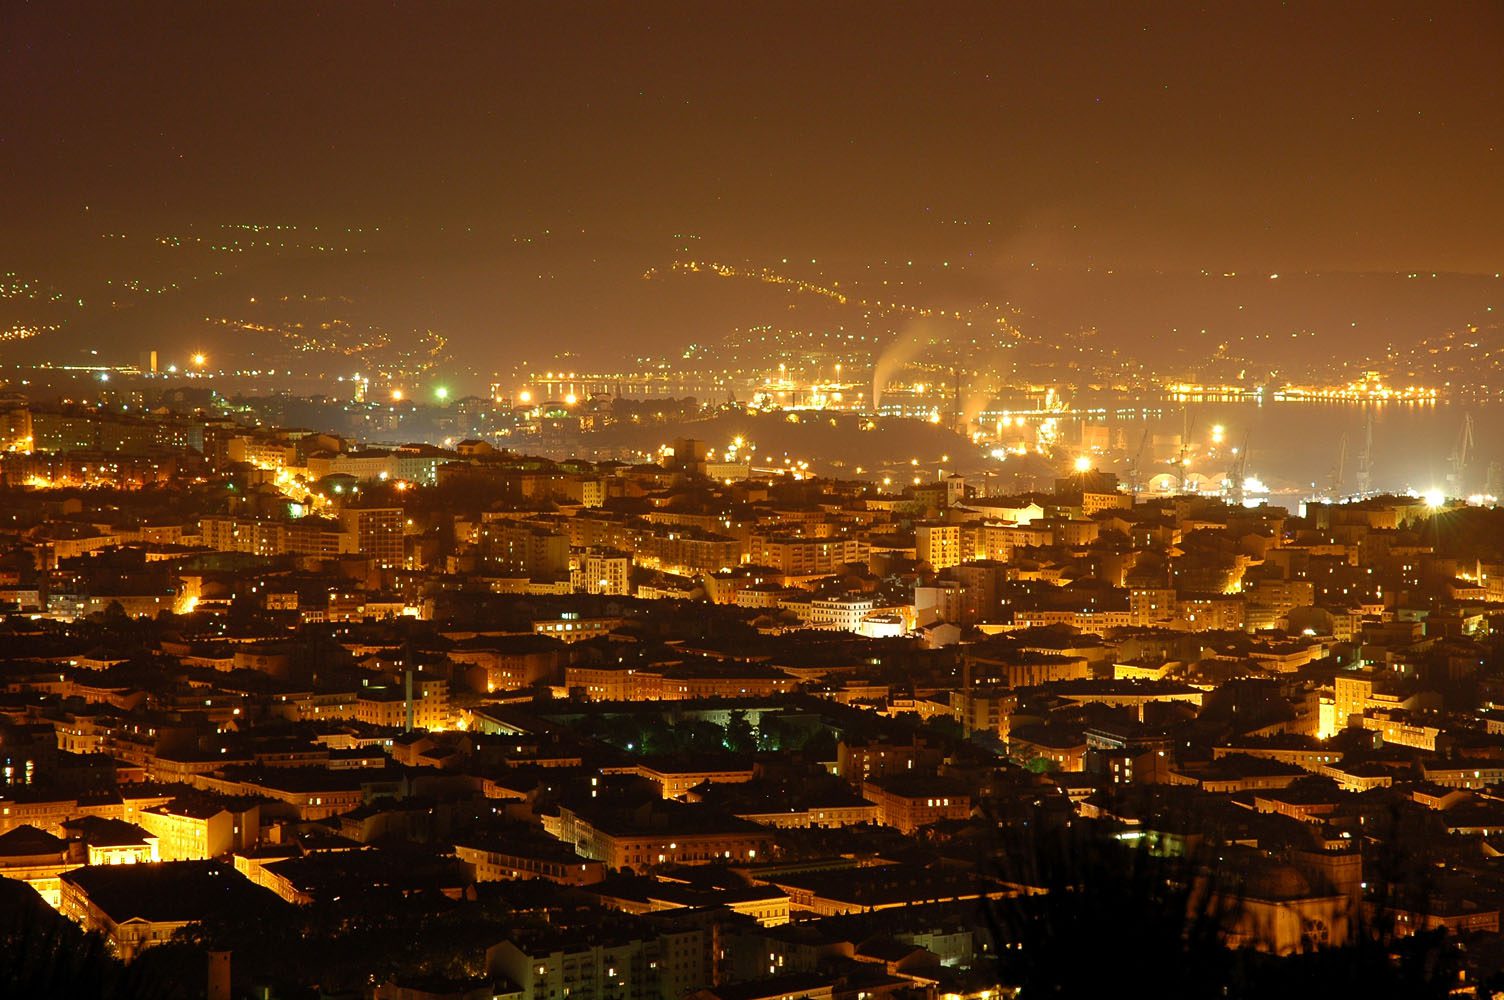 Trieste on fire / night photography